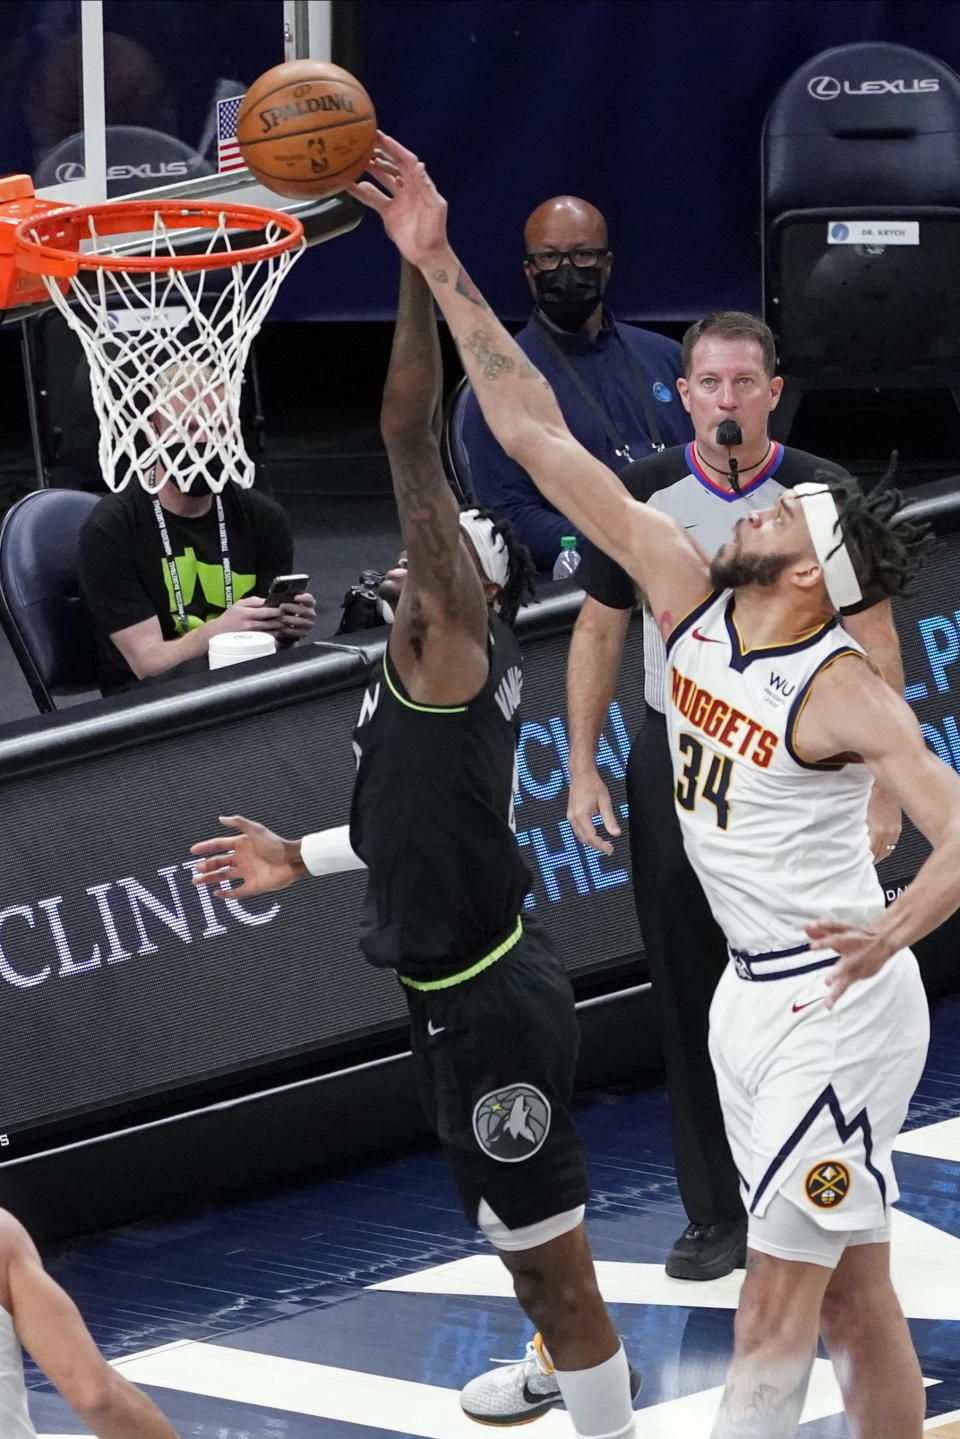 Denver Nuggets' JaVale McGee (34) knocks away a layup by Minnesota Timberwolves' Jarred Vanderbilt during the first half of an NBA basketball game Thursday, May 13, 2021, in Minneapolis. (AP Photo/Jim Mone)